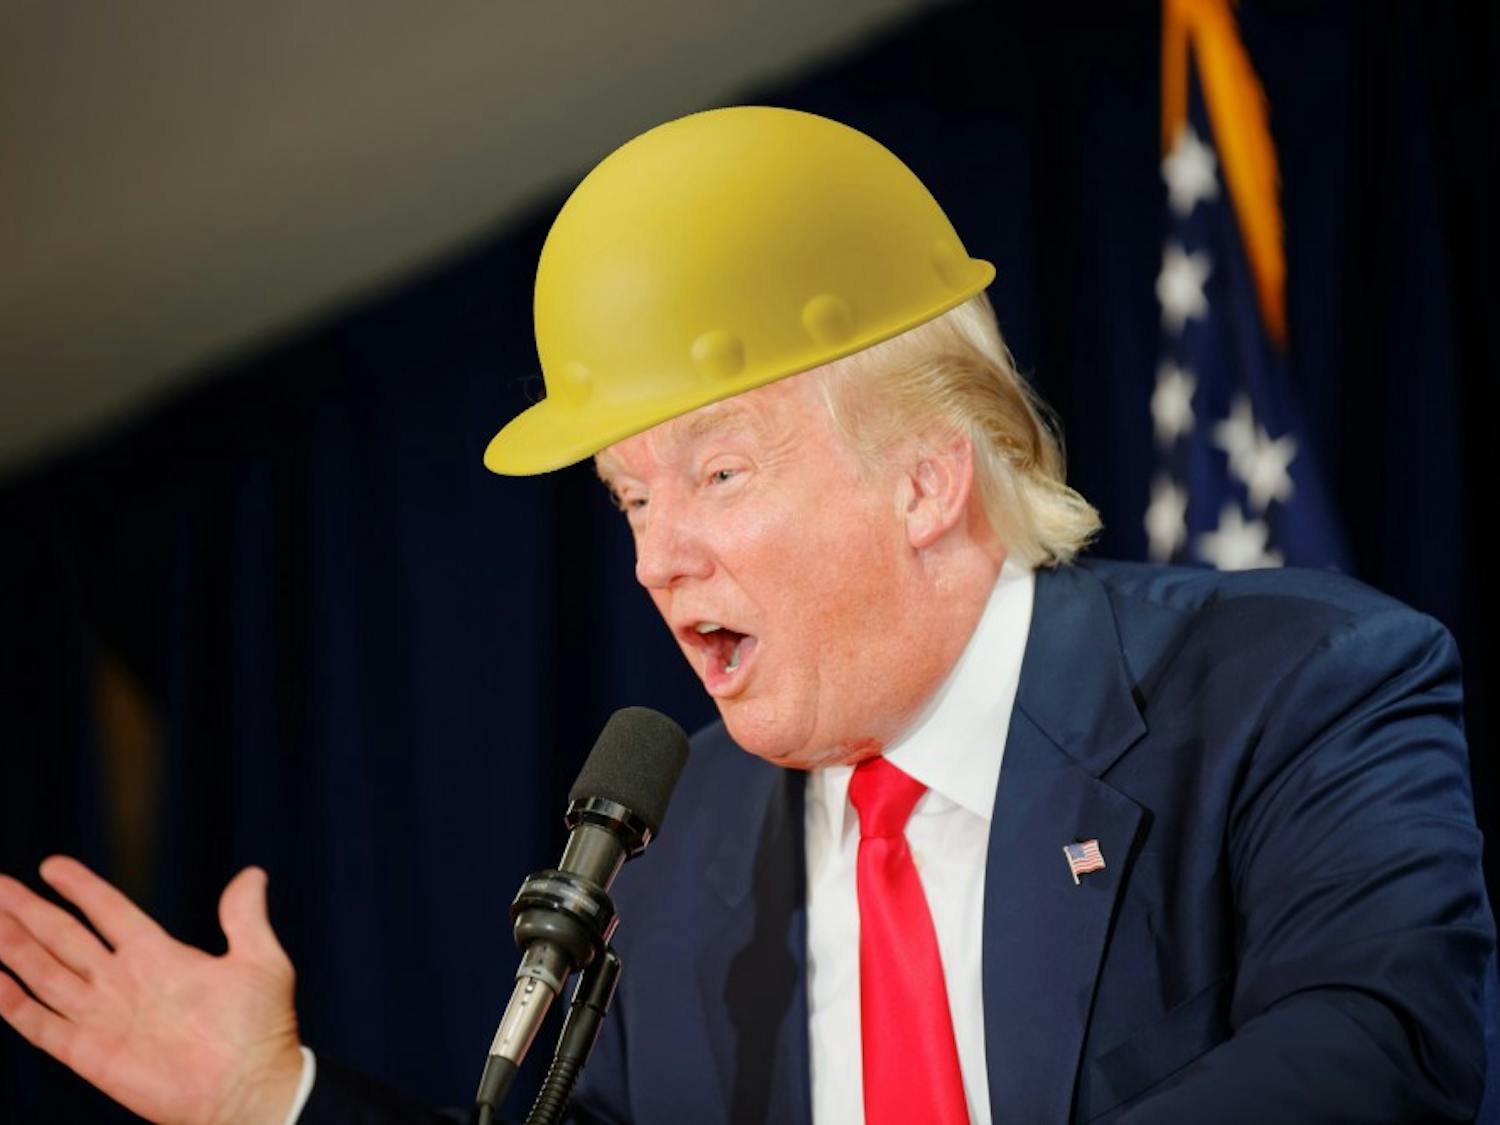 Trump forgot to remove his helmet after appraising a gold mine.